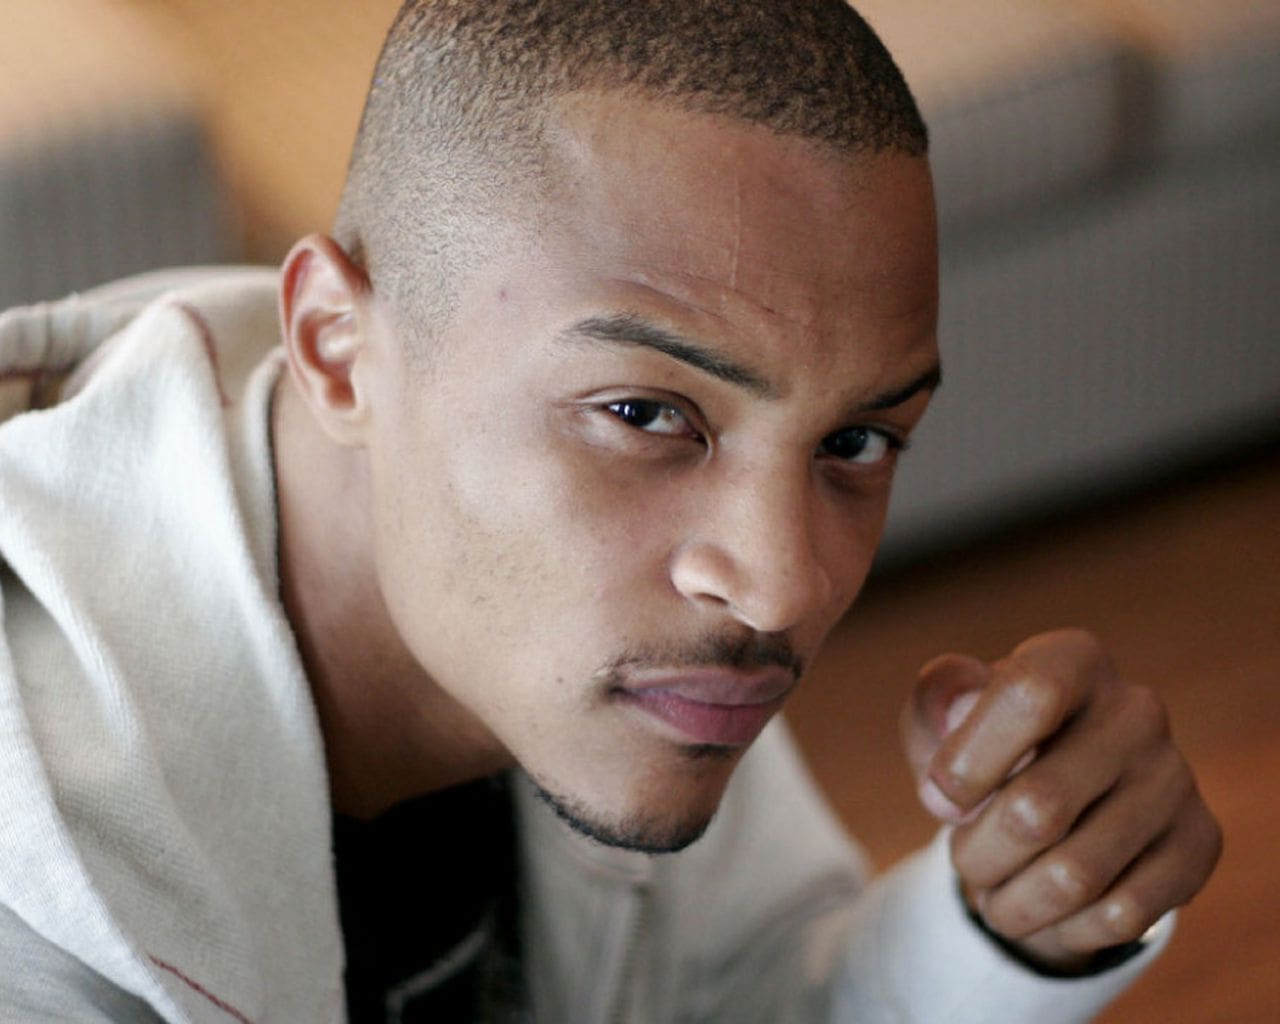 T.I. Drops An Important Message For His Fans And Followers About What's Going On In The US